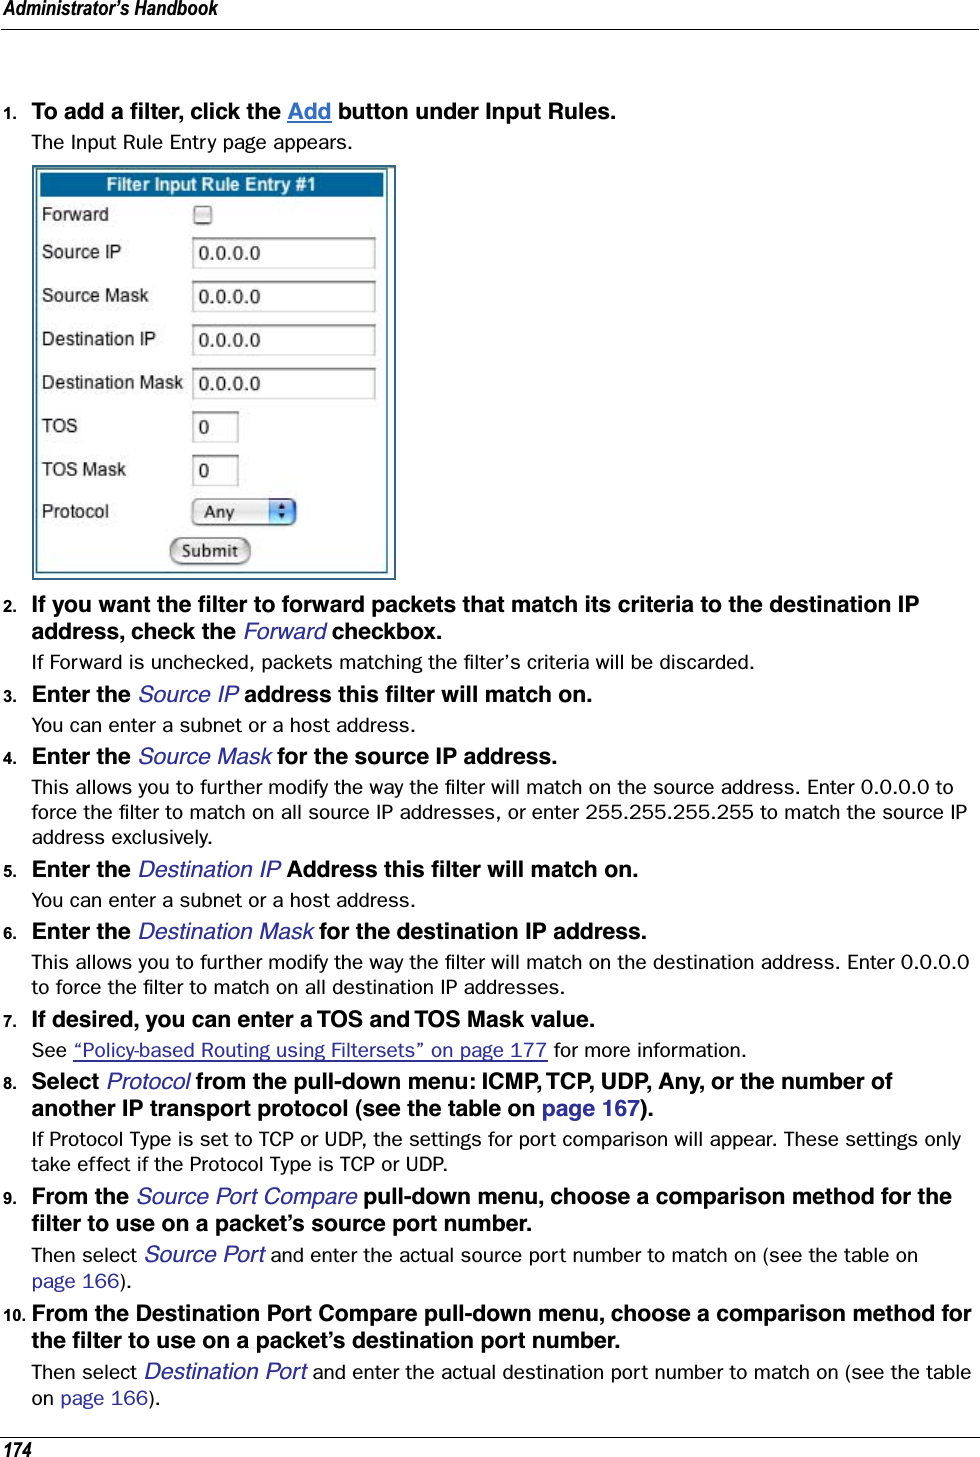 Administrator’s Handbook1741. To add a ﬁlter, click the Add button under Input Rules.The Input Rule Entry page appears.2. If you want the ﬁlter to forward packets that match its criteria to the destination IP address, check the Forward checkbox.If Forward is unchecked, packets matching the ﬁlter’s criteria will be discarded.3. Enter the Source IP address this ﬁlter will match on.You can enter a subnet or a host address.4. Enter the Source Mask for the source IP address.This allows you to further modify the way the ﬁlter will match on the source address. Enter 0.0.0.0 to force the ﬁlter to match on all source IP addresses, or enter 255.255.255.255 to match the source IP address exclusively.5. Enter the Destination IP Address this ﬁlter will match on. You can enter a subnet or a host address.6. Enter the Destination Mask for the destination IP address.This allows you to further modify the way the ﬁlter will match on the destination address. Enter 0.0.0.0 to force the ﬁlter to match on all destination IP addresses.7. If desired, you can enter a TOS and TOS Mask value.See “Policy-based Routing using Filtersets” on page 177 for more information.8. Select Protocol from the pull-down menu: ICMP, TCP, UDP, Any, or the number of another IP transport protocol (see the table on page 167).If Protocol Type is set to TCP or UDP, the settings for port comparison will appear. These settings only take effect if the Protocol Type is TCP or UDP.9. From the Source Port Compare pull-down menu, choose a comparison method for the ﬁlter to use on a packet’s source port number.Then select Source Port and enter the actual source port number to match on (see the table on page 166).10. From the Destination Port Compare pull-down menu, choose a comparison method for the ﬁlter to use on a packet’s destination port number.Then select Destination Port and enter the actual destination port number to match on (see the table on page 166).